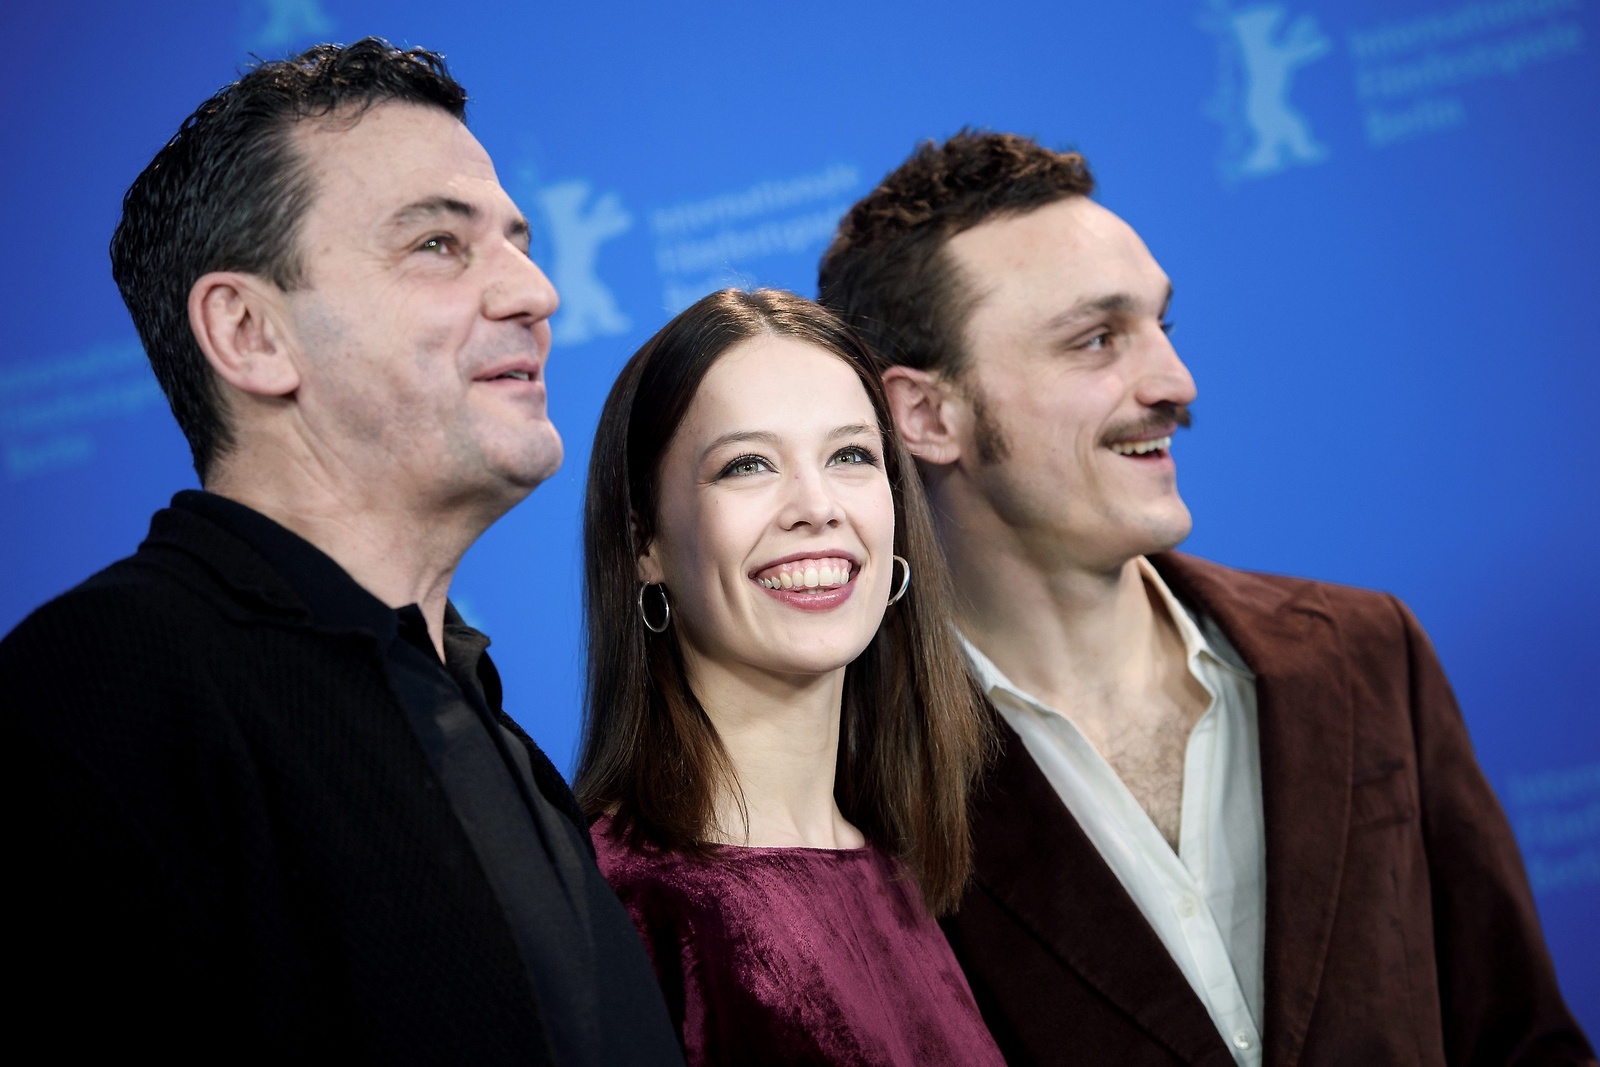 Director Christian Petzold, left, actress Paula Beer, center, and actor Franz Rogowski, right, pose during a photo-call for the film Undine at the 70th International Film Festival Berlin, Berlinale in Berlin, Germany, Sunday, Feb. 23, 2020. (Gregor Fischer/dpa via AP)  DMSC126